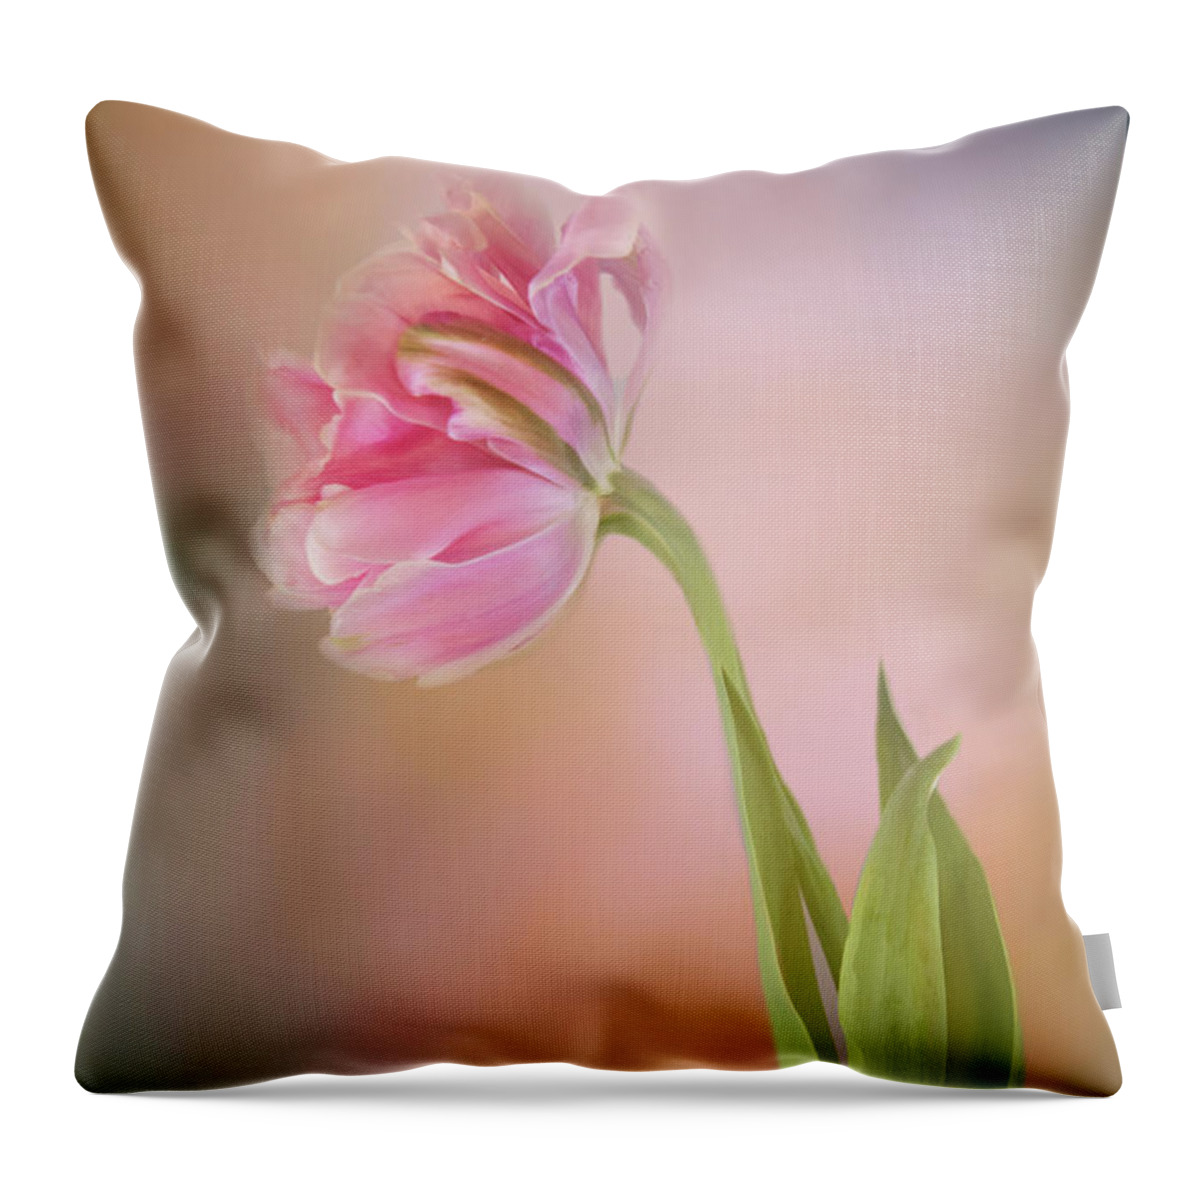 Photography Throw Pillow featuring the digital art Tulip Beauty by Terry Davis